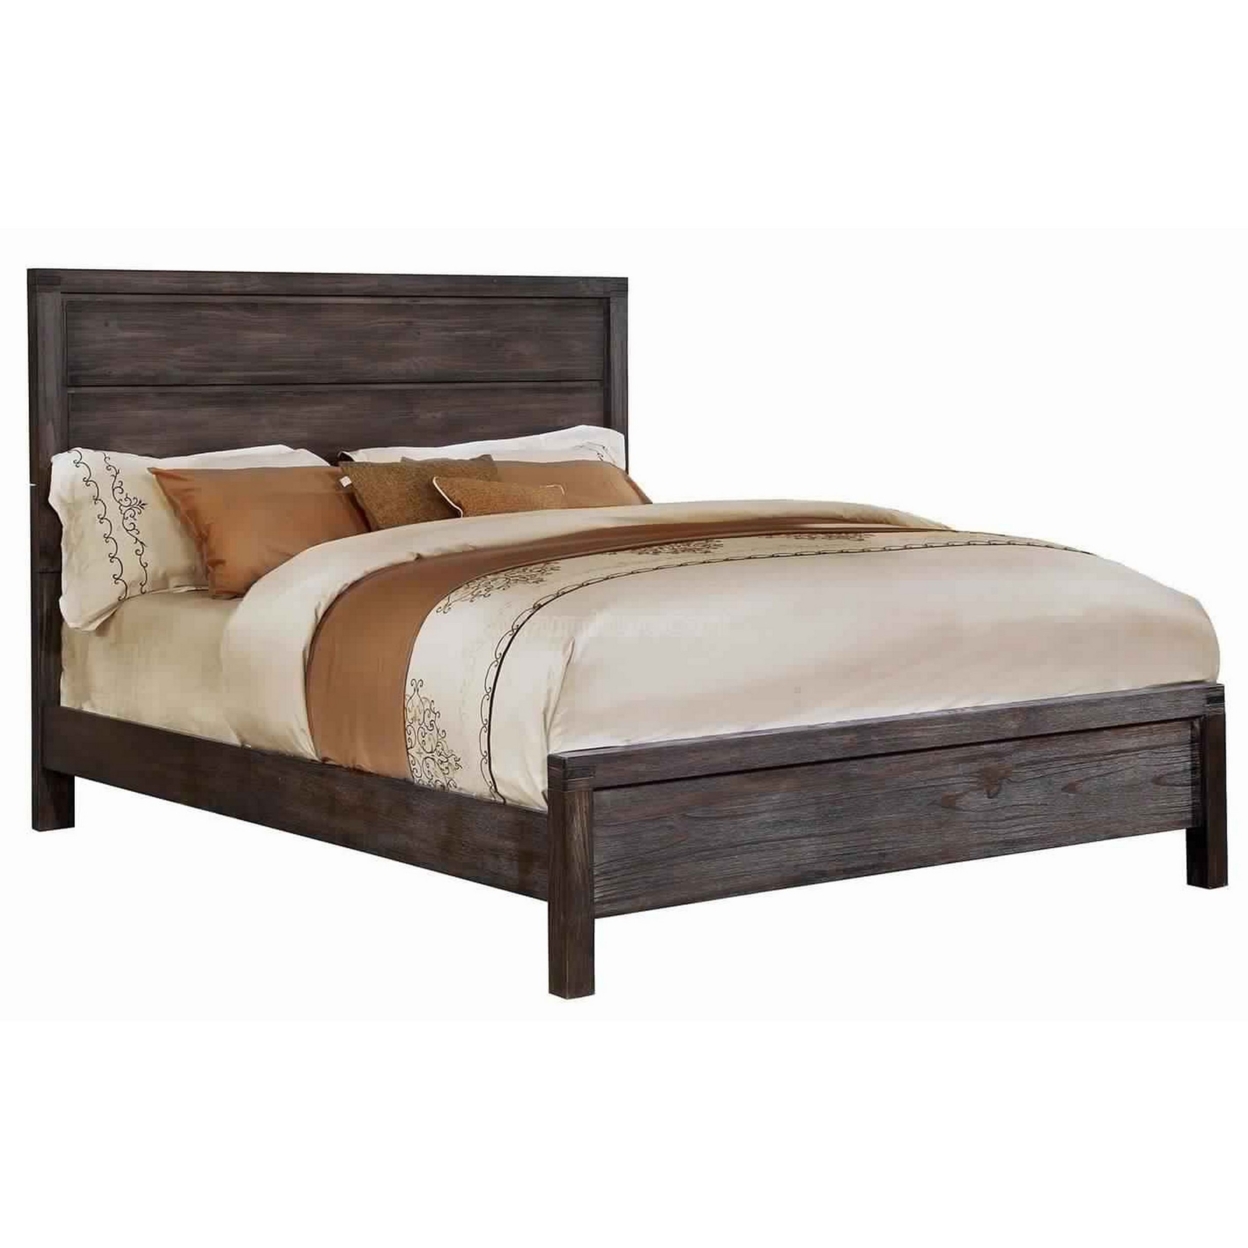 Wooden Eastern King Bed With Panel Headboard, Brown And Gray- Saltoro Sherpi